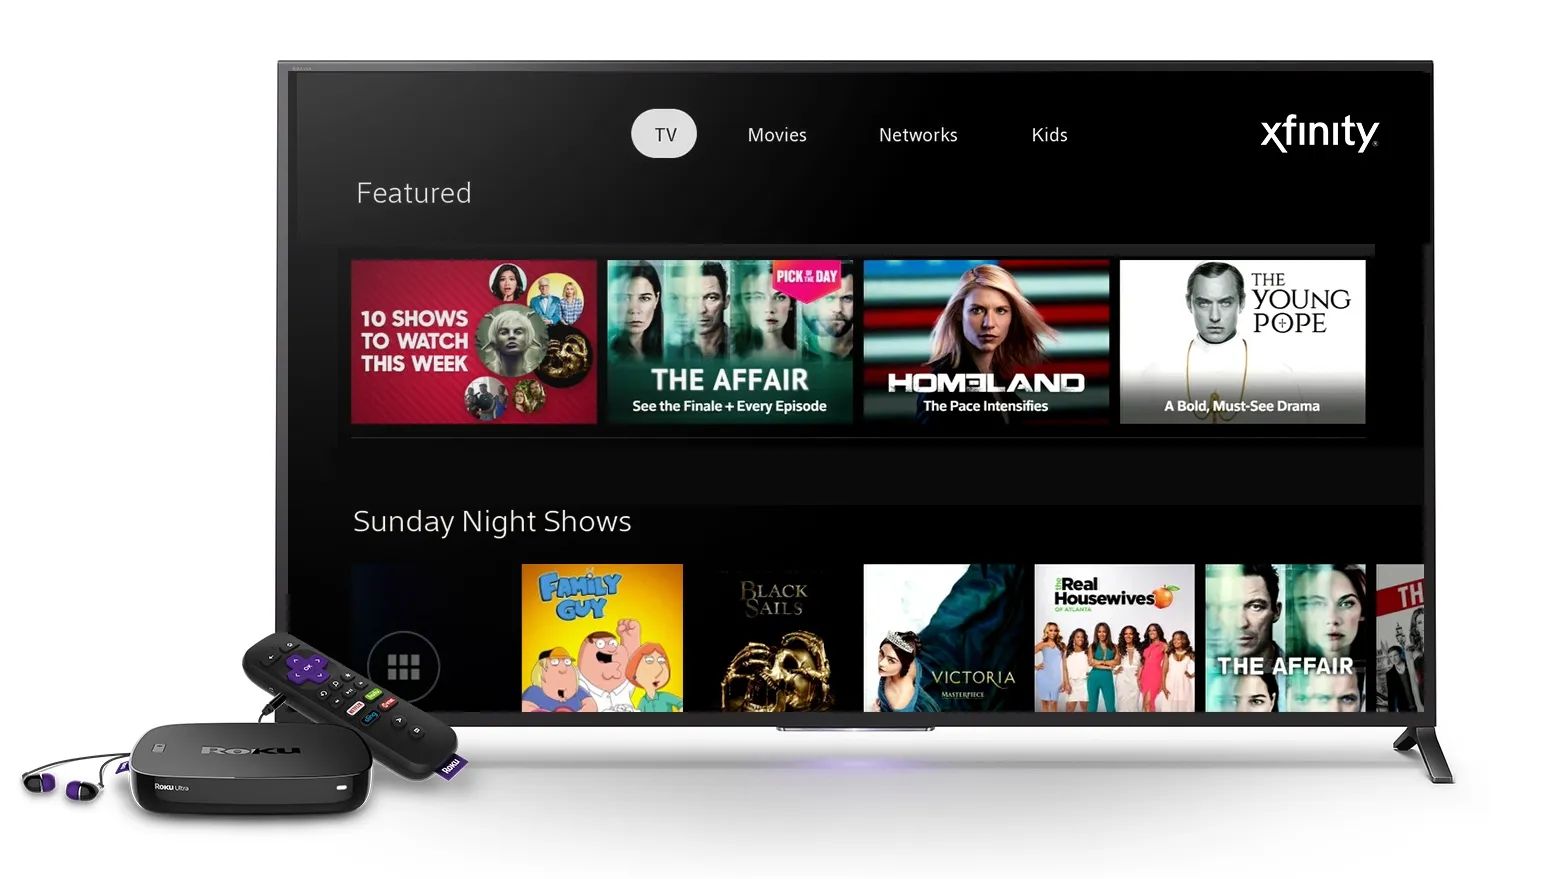 How To Use Xfinity App On Smart TV